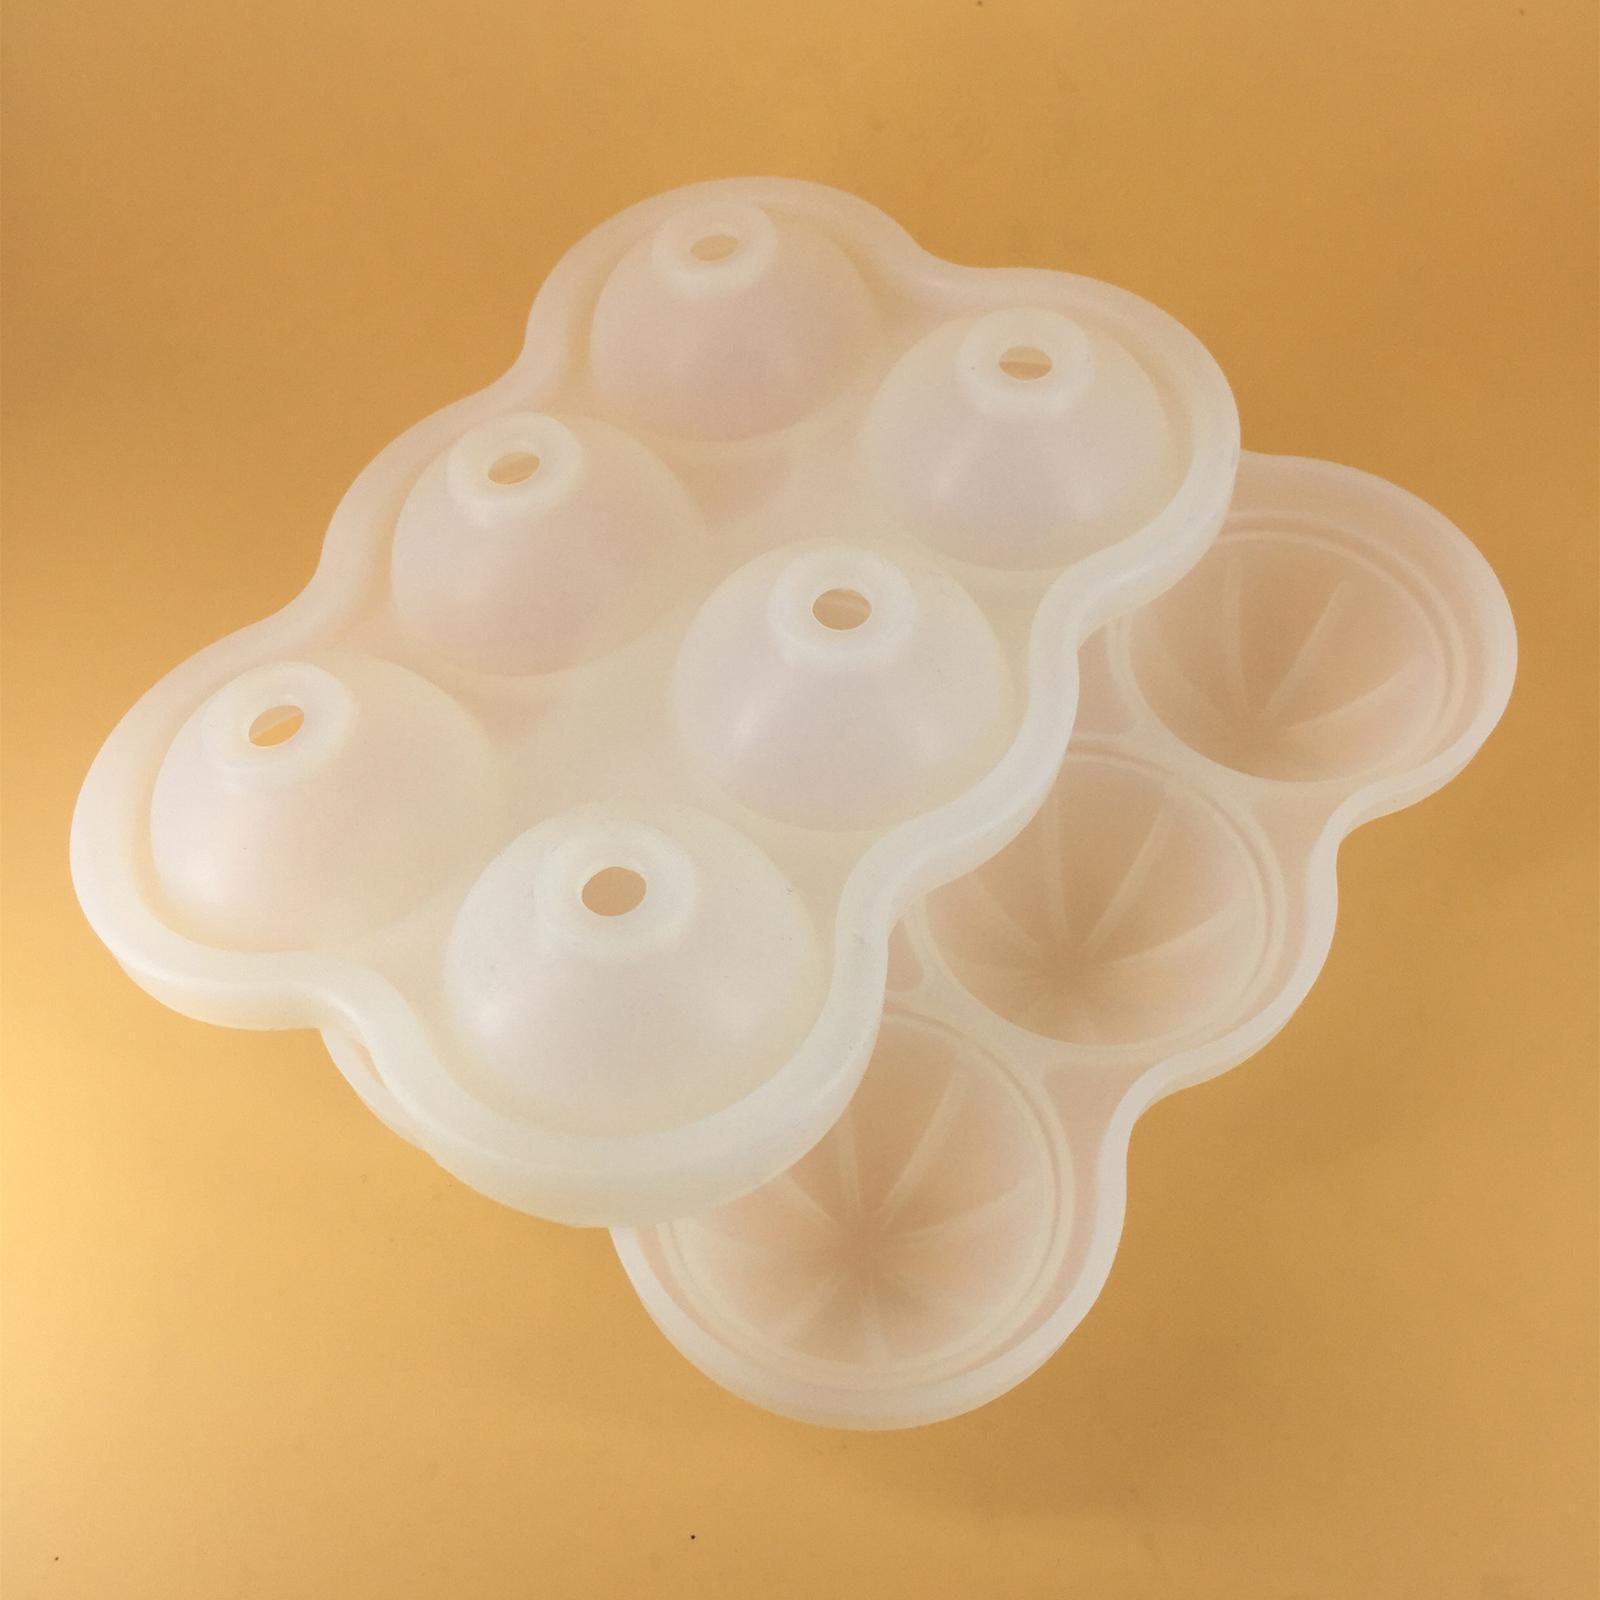 2x Round Ice Cube Ball Tray Silicone Sphere Mold Cocktails